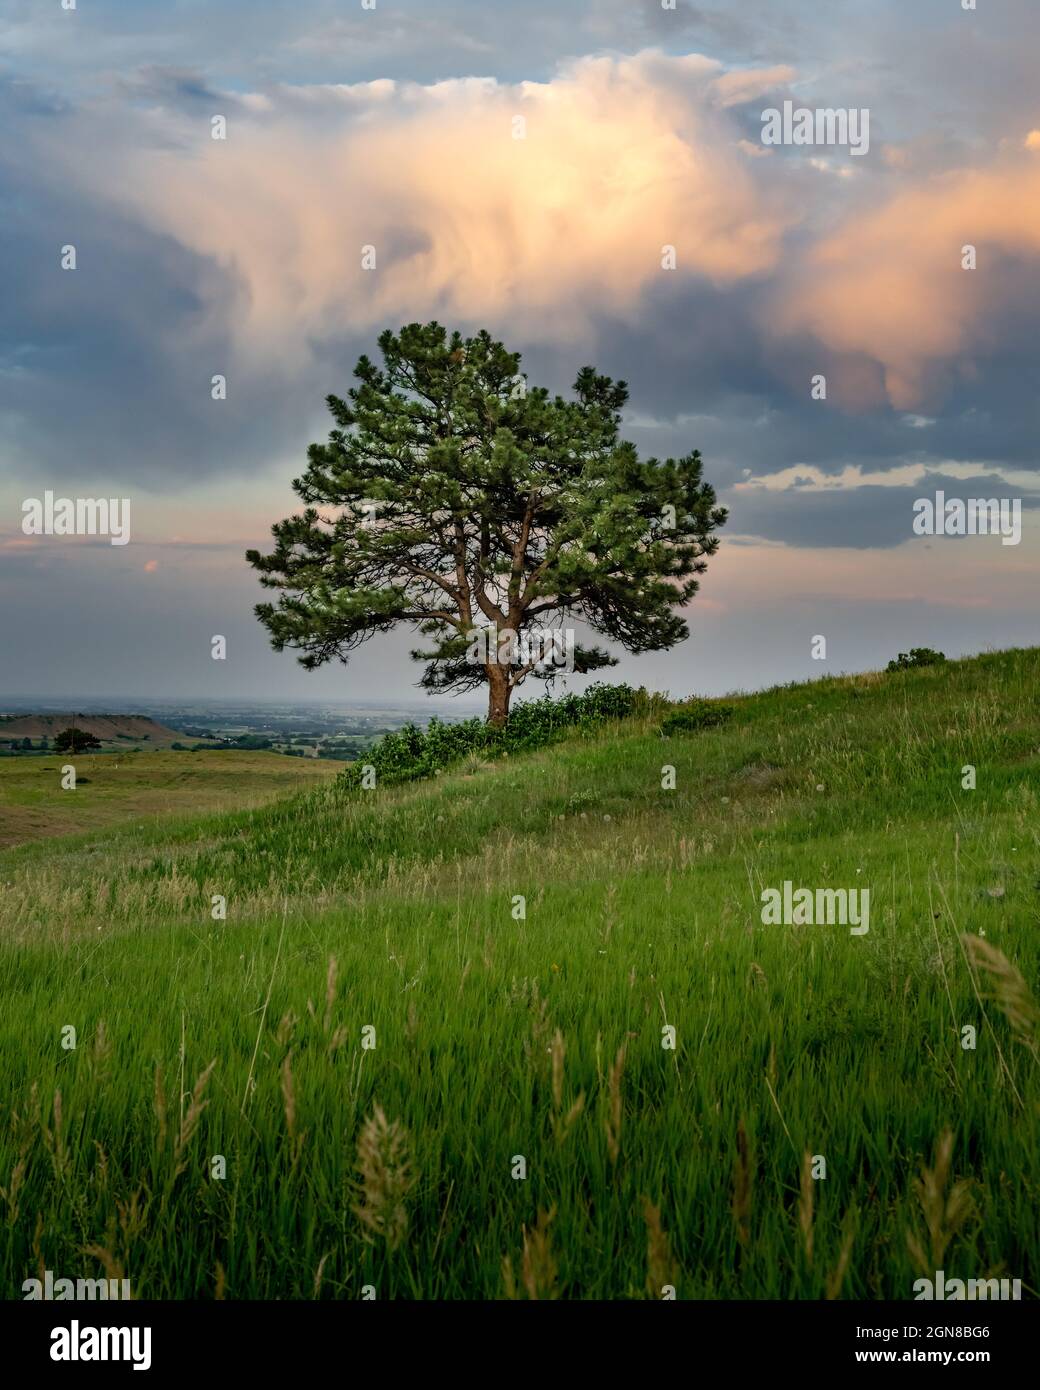 A single tree stands on a hill above a meadow with colorful clouds from a sunset behind it Stock Photo